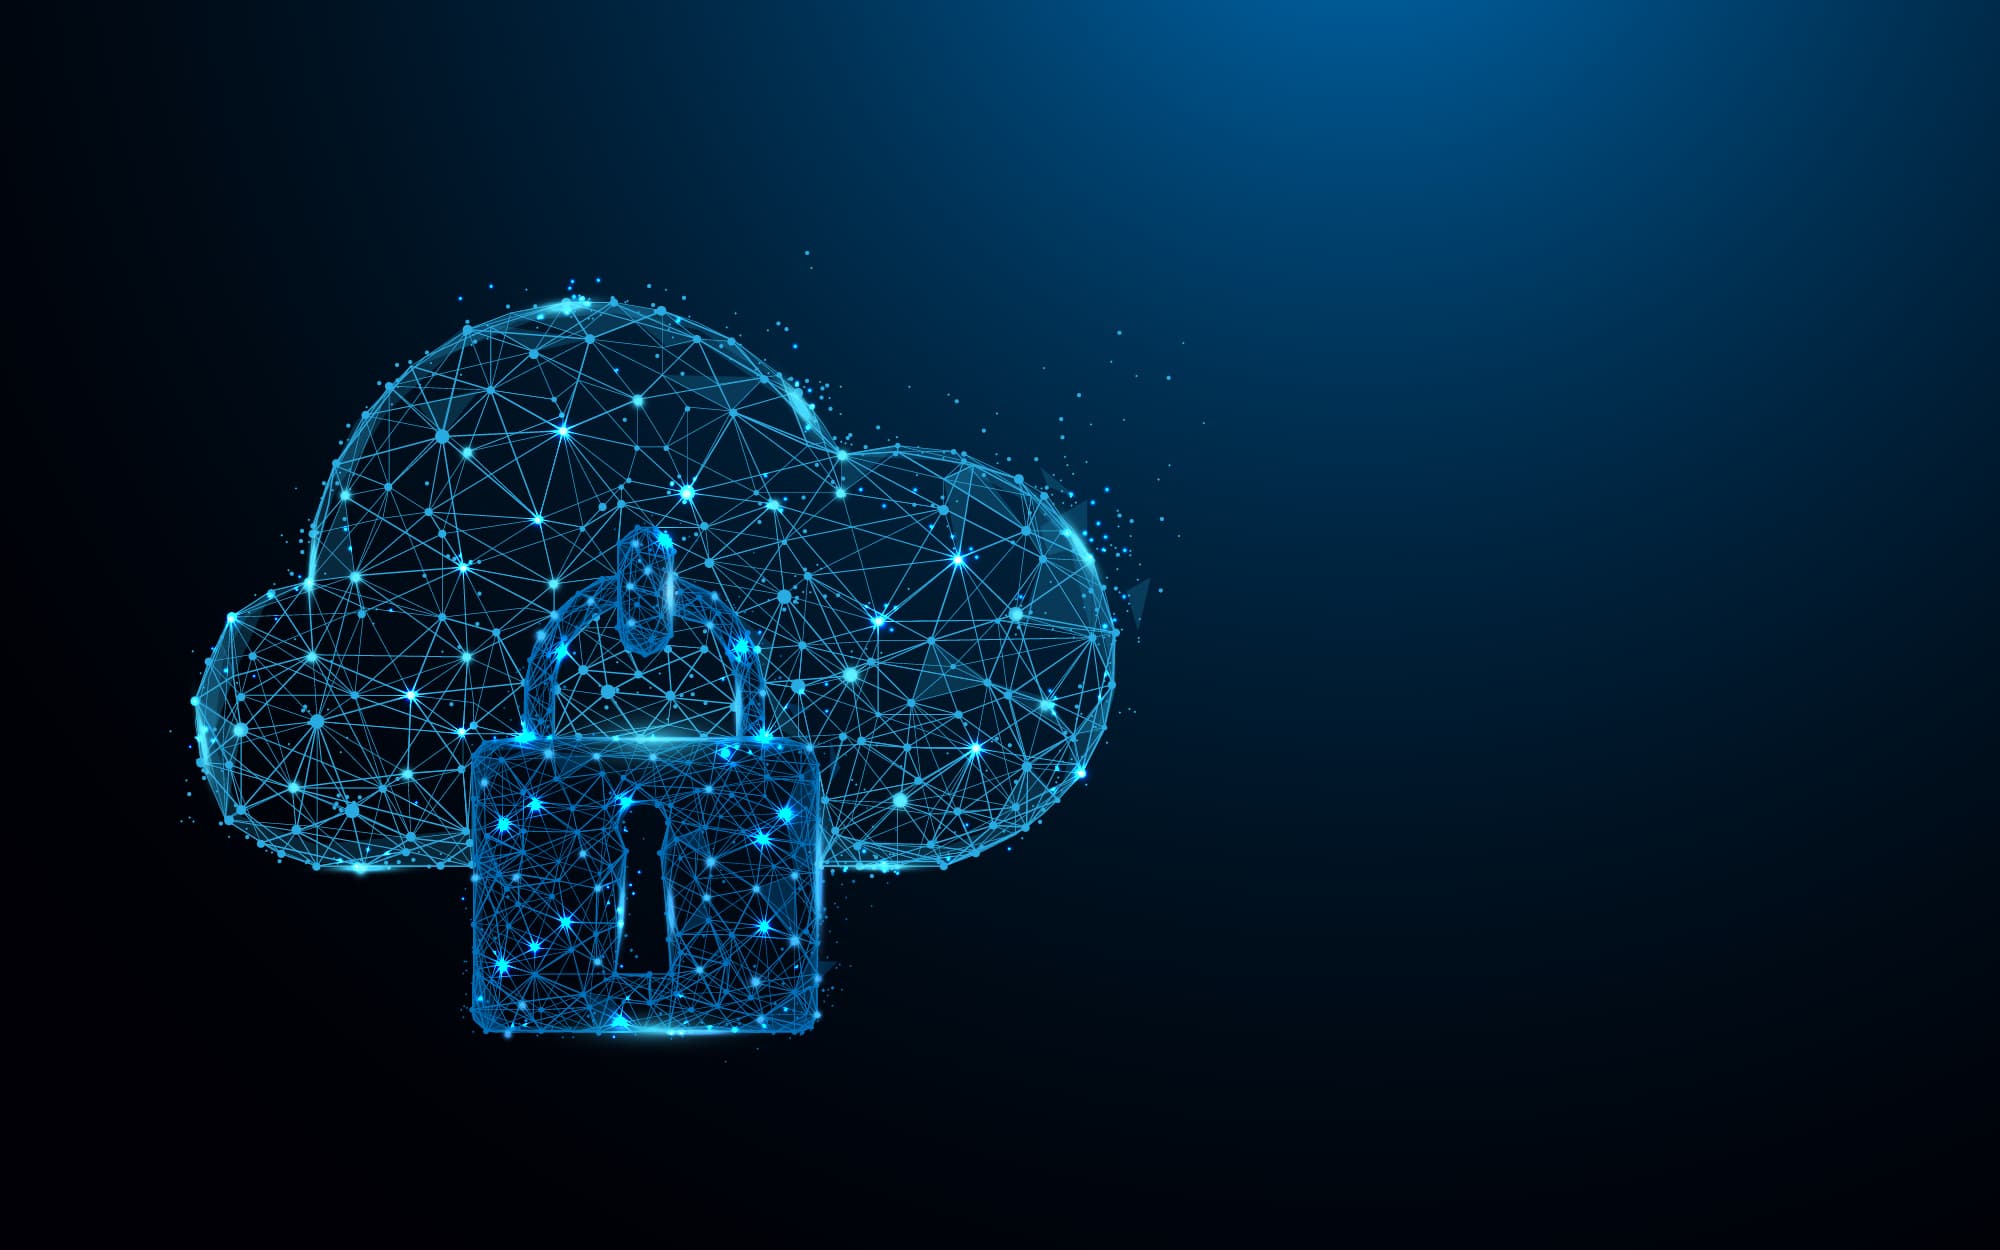 Cloud with a lock made up of data points